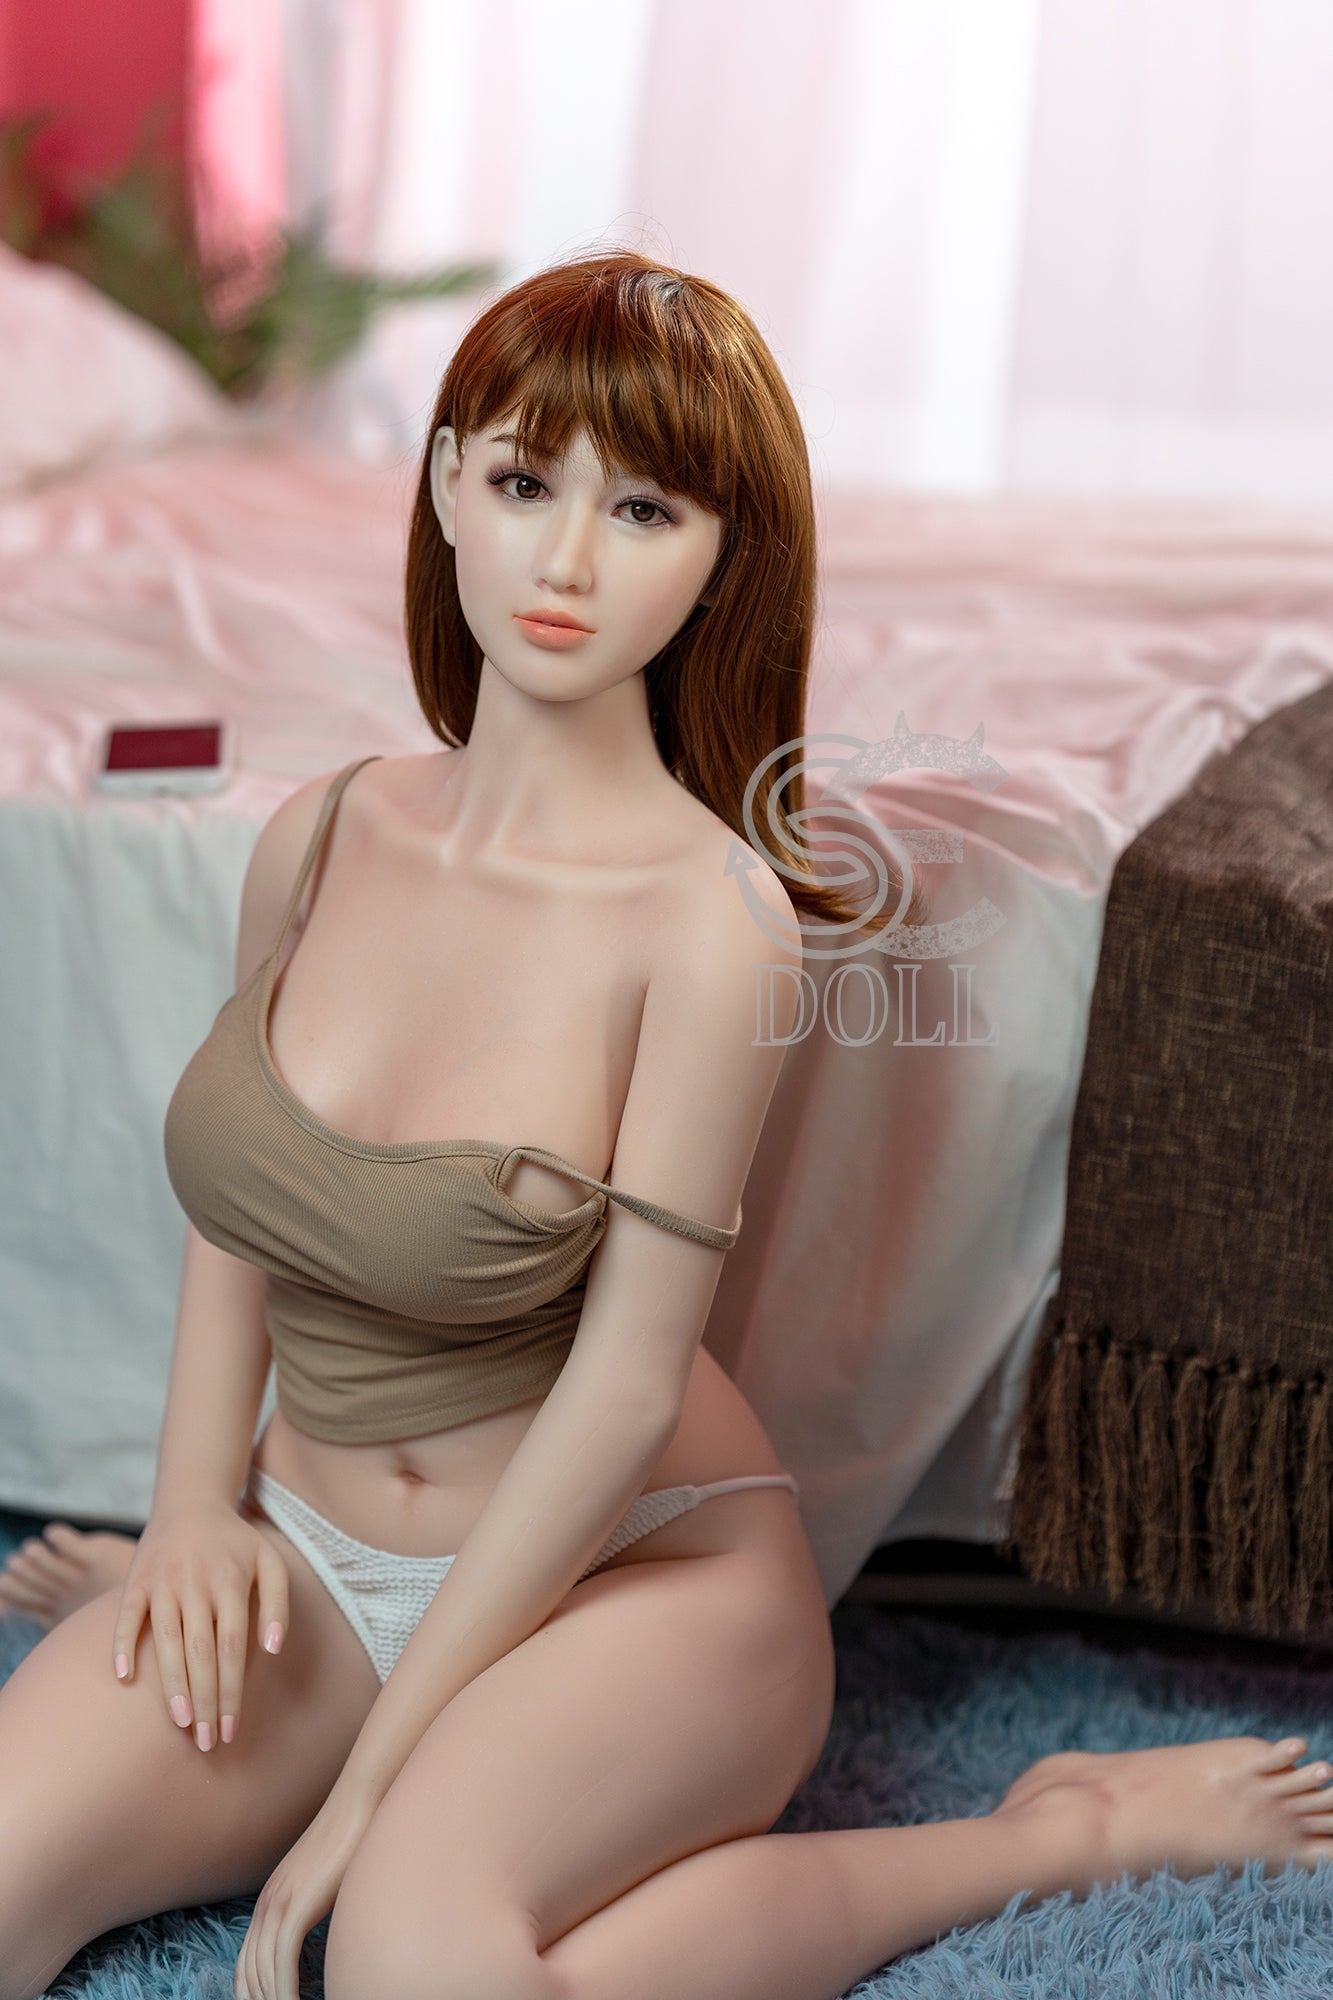 SEDOLL 160 cm C Silicone - Sarah | Buy Sex Dolls at DOLLS ACTUALLY